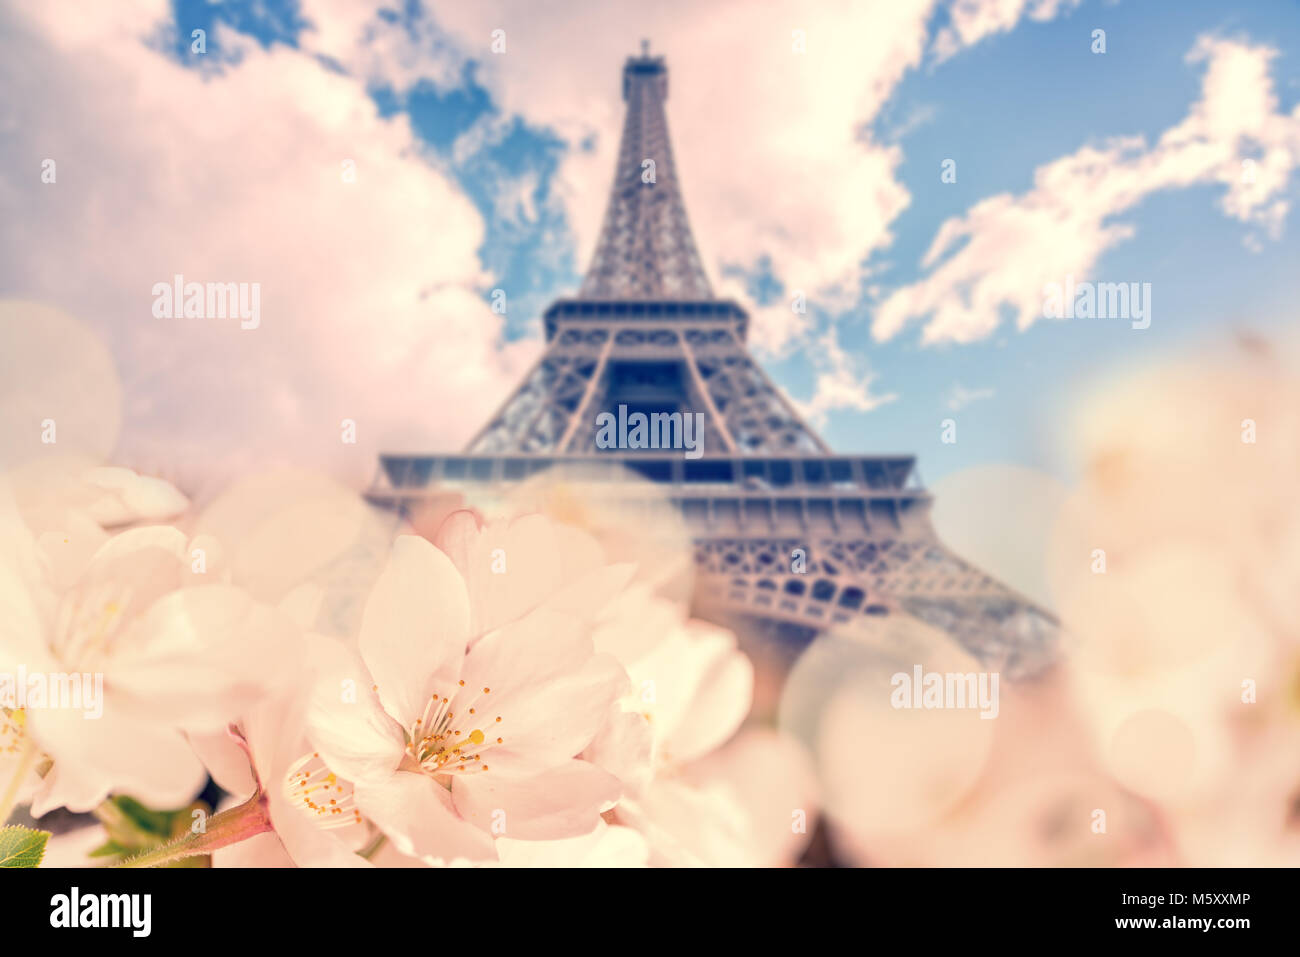 Cherry blossom, Eiffel tower in the background, spring in Paris France Stock Photo